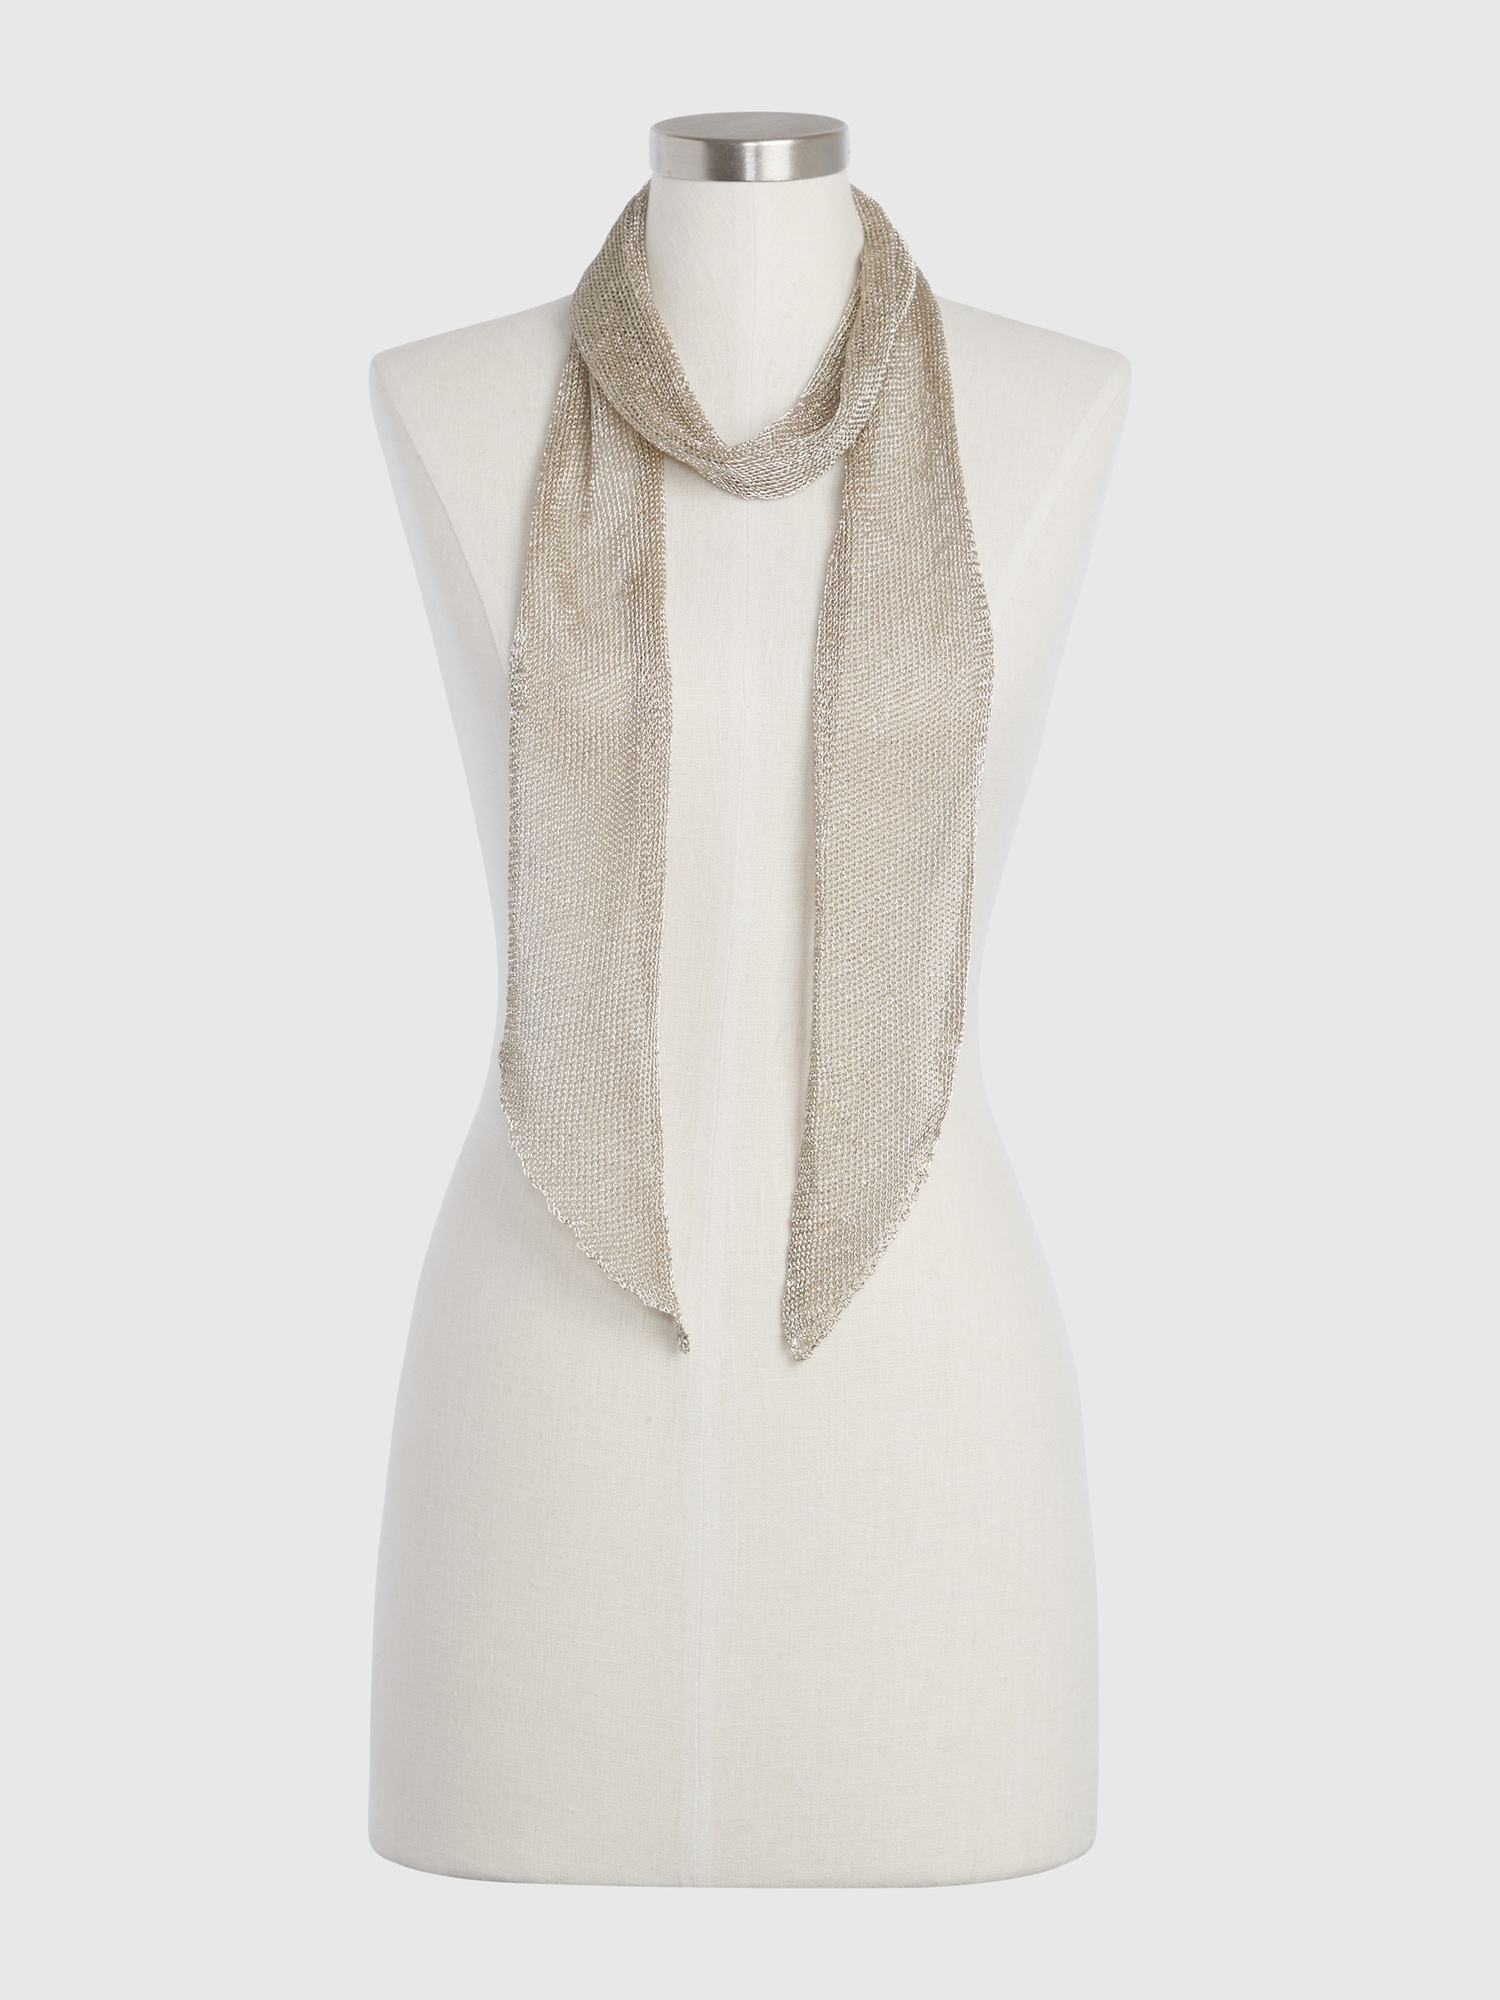 Silver Mesh Fringed Scarf with Metallic Threads — Scarves and More